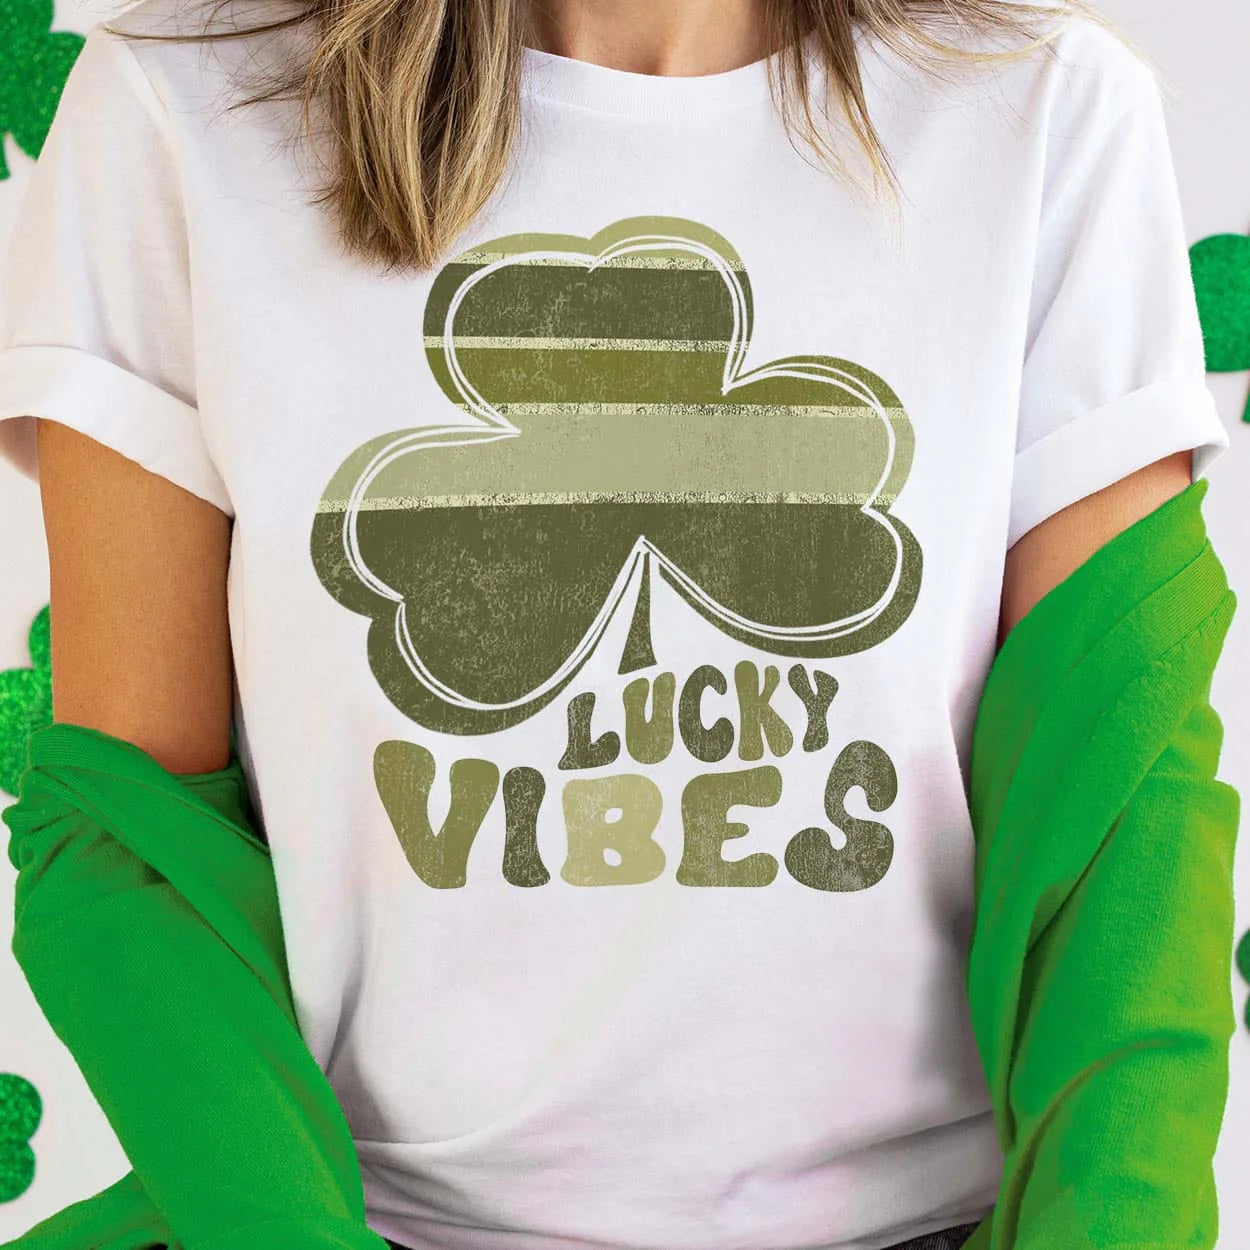 A white short sleeve tee with cuffed sleeves featuring a large graphic of a clover with various shades of green and the words "lucky vibes" below it with each letter coordinating to a color in the clover. Item is pictured on a white and green background.